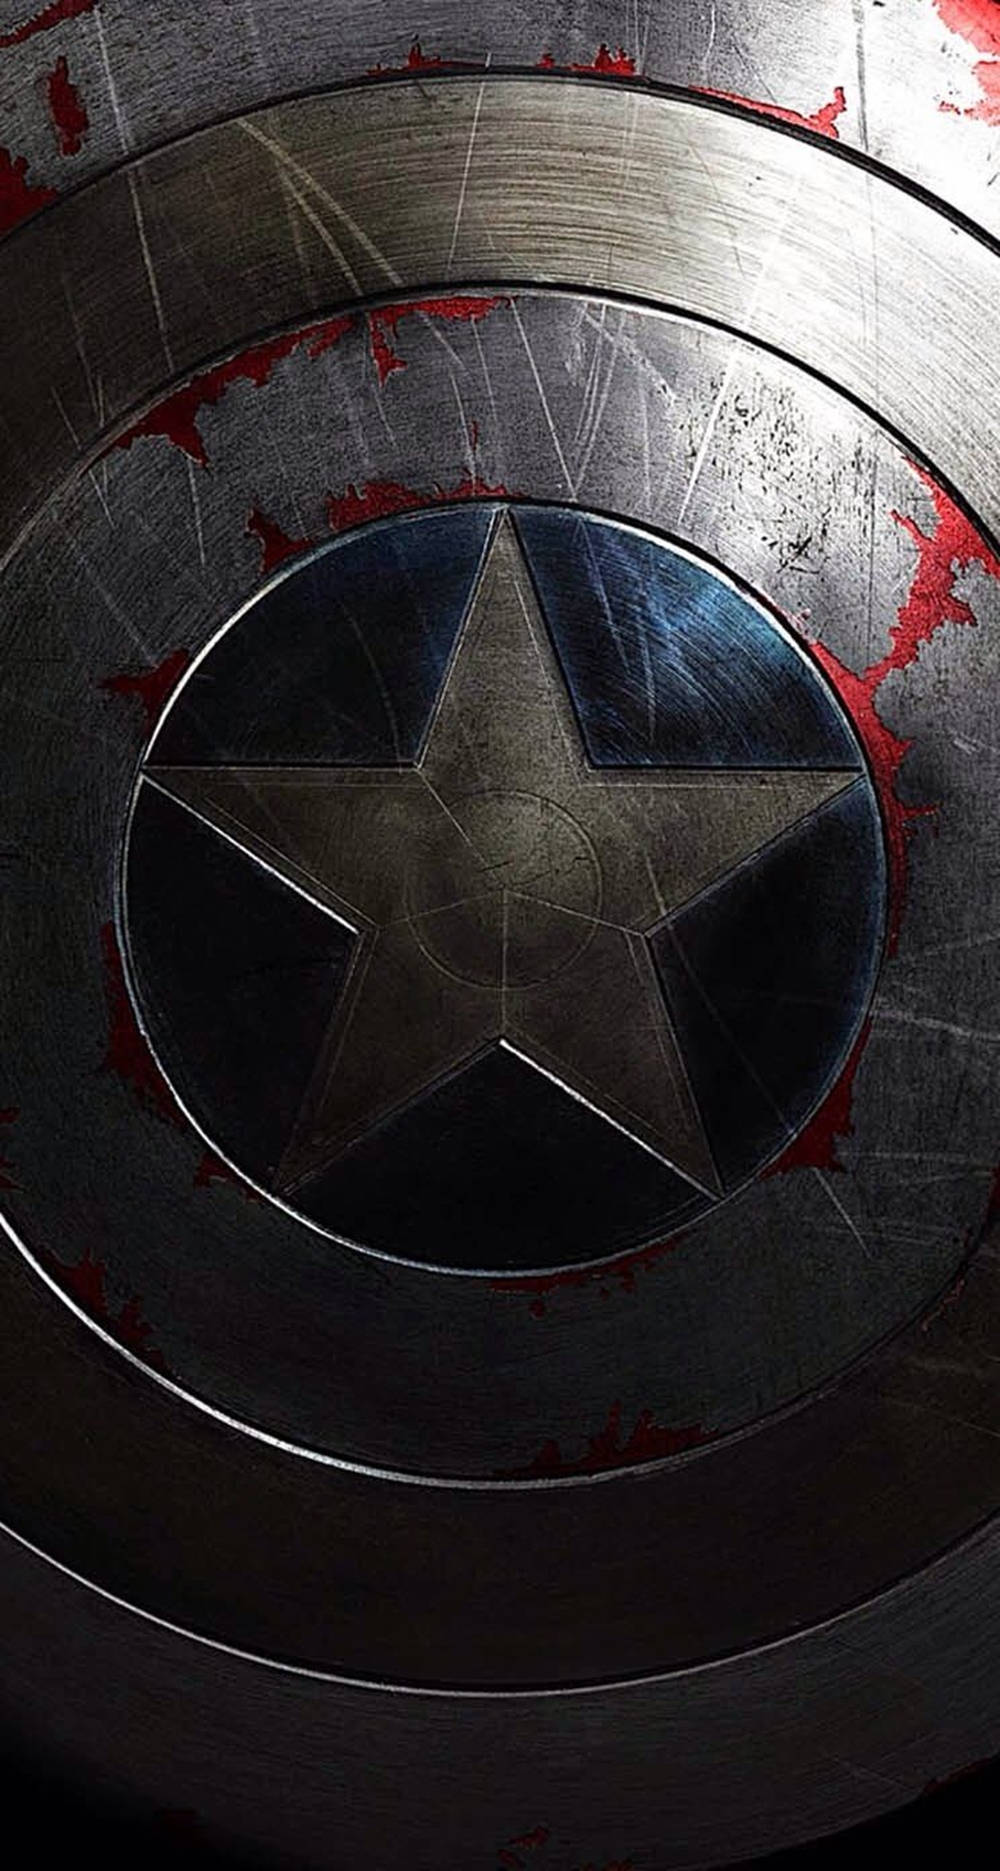 Captain America Shield Iphone Paint Peeled Off Wallpaper